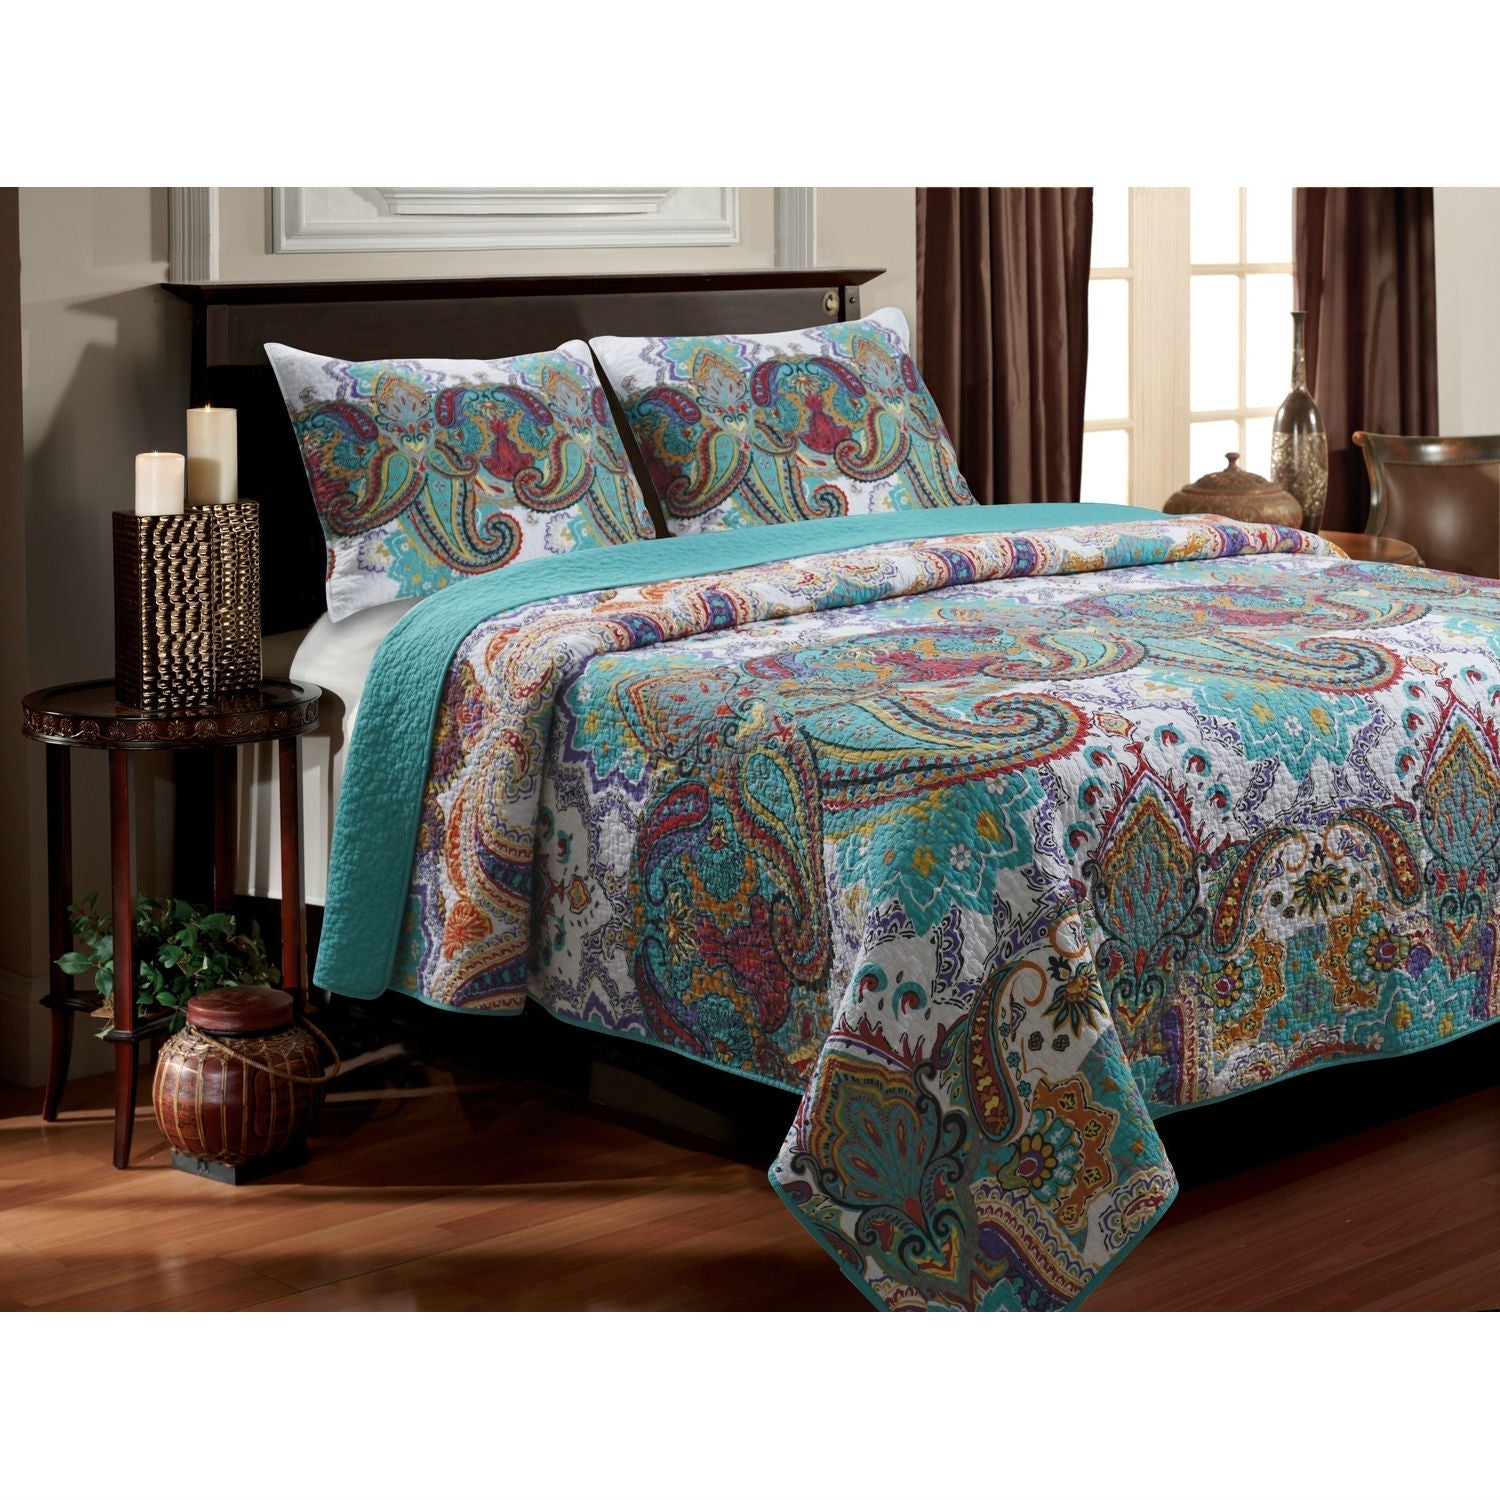 Bedroom > Quilts & Blankets - Full / Queen Teal Paisley 3-Piece Quilt Set In 100-Percent Cotton